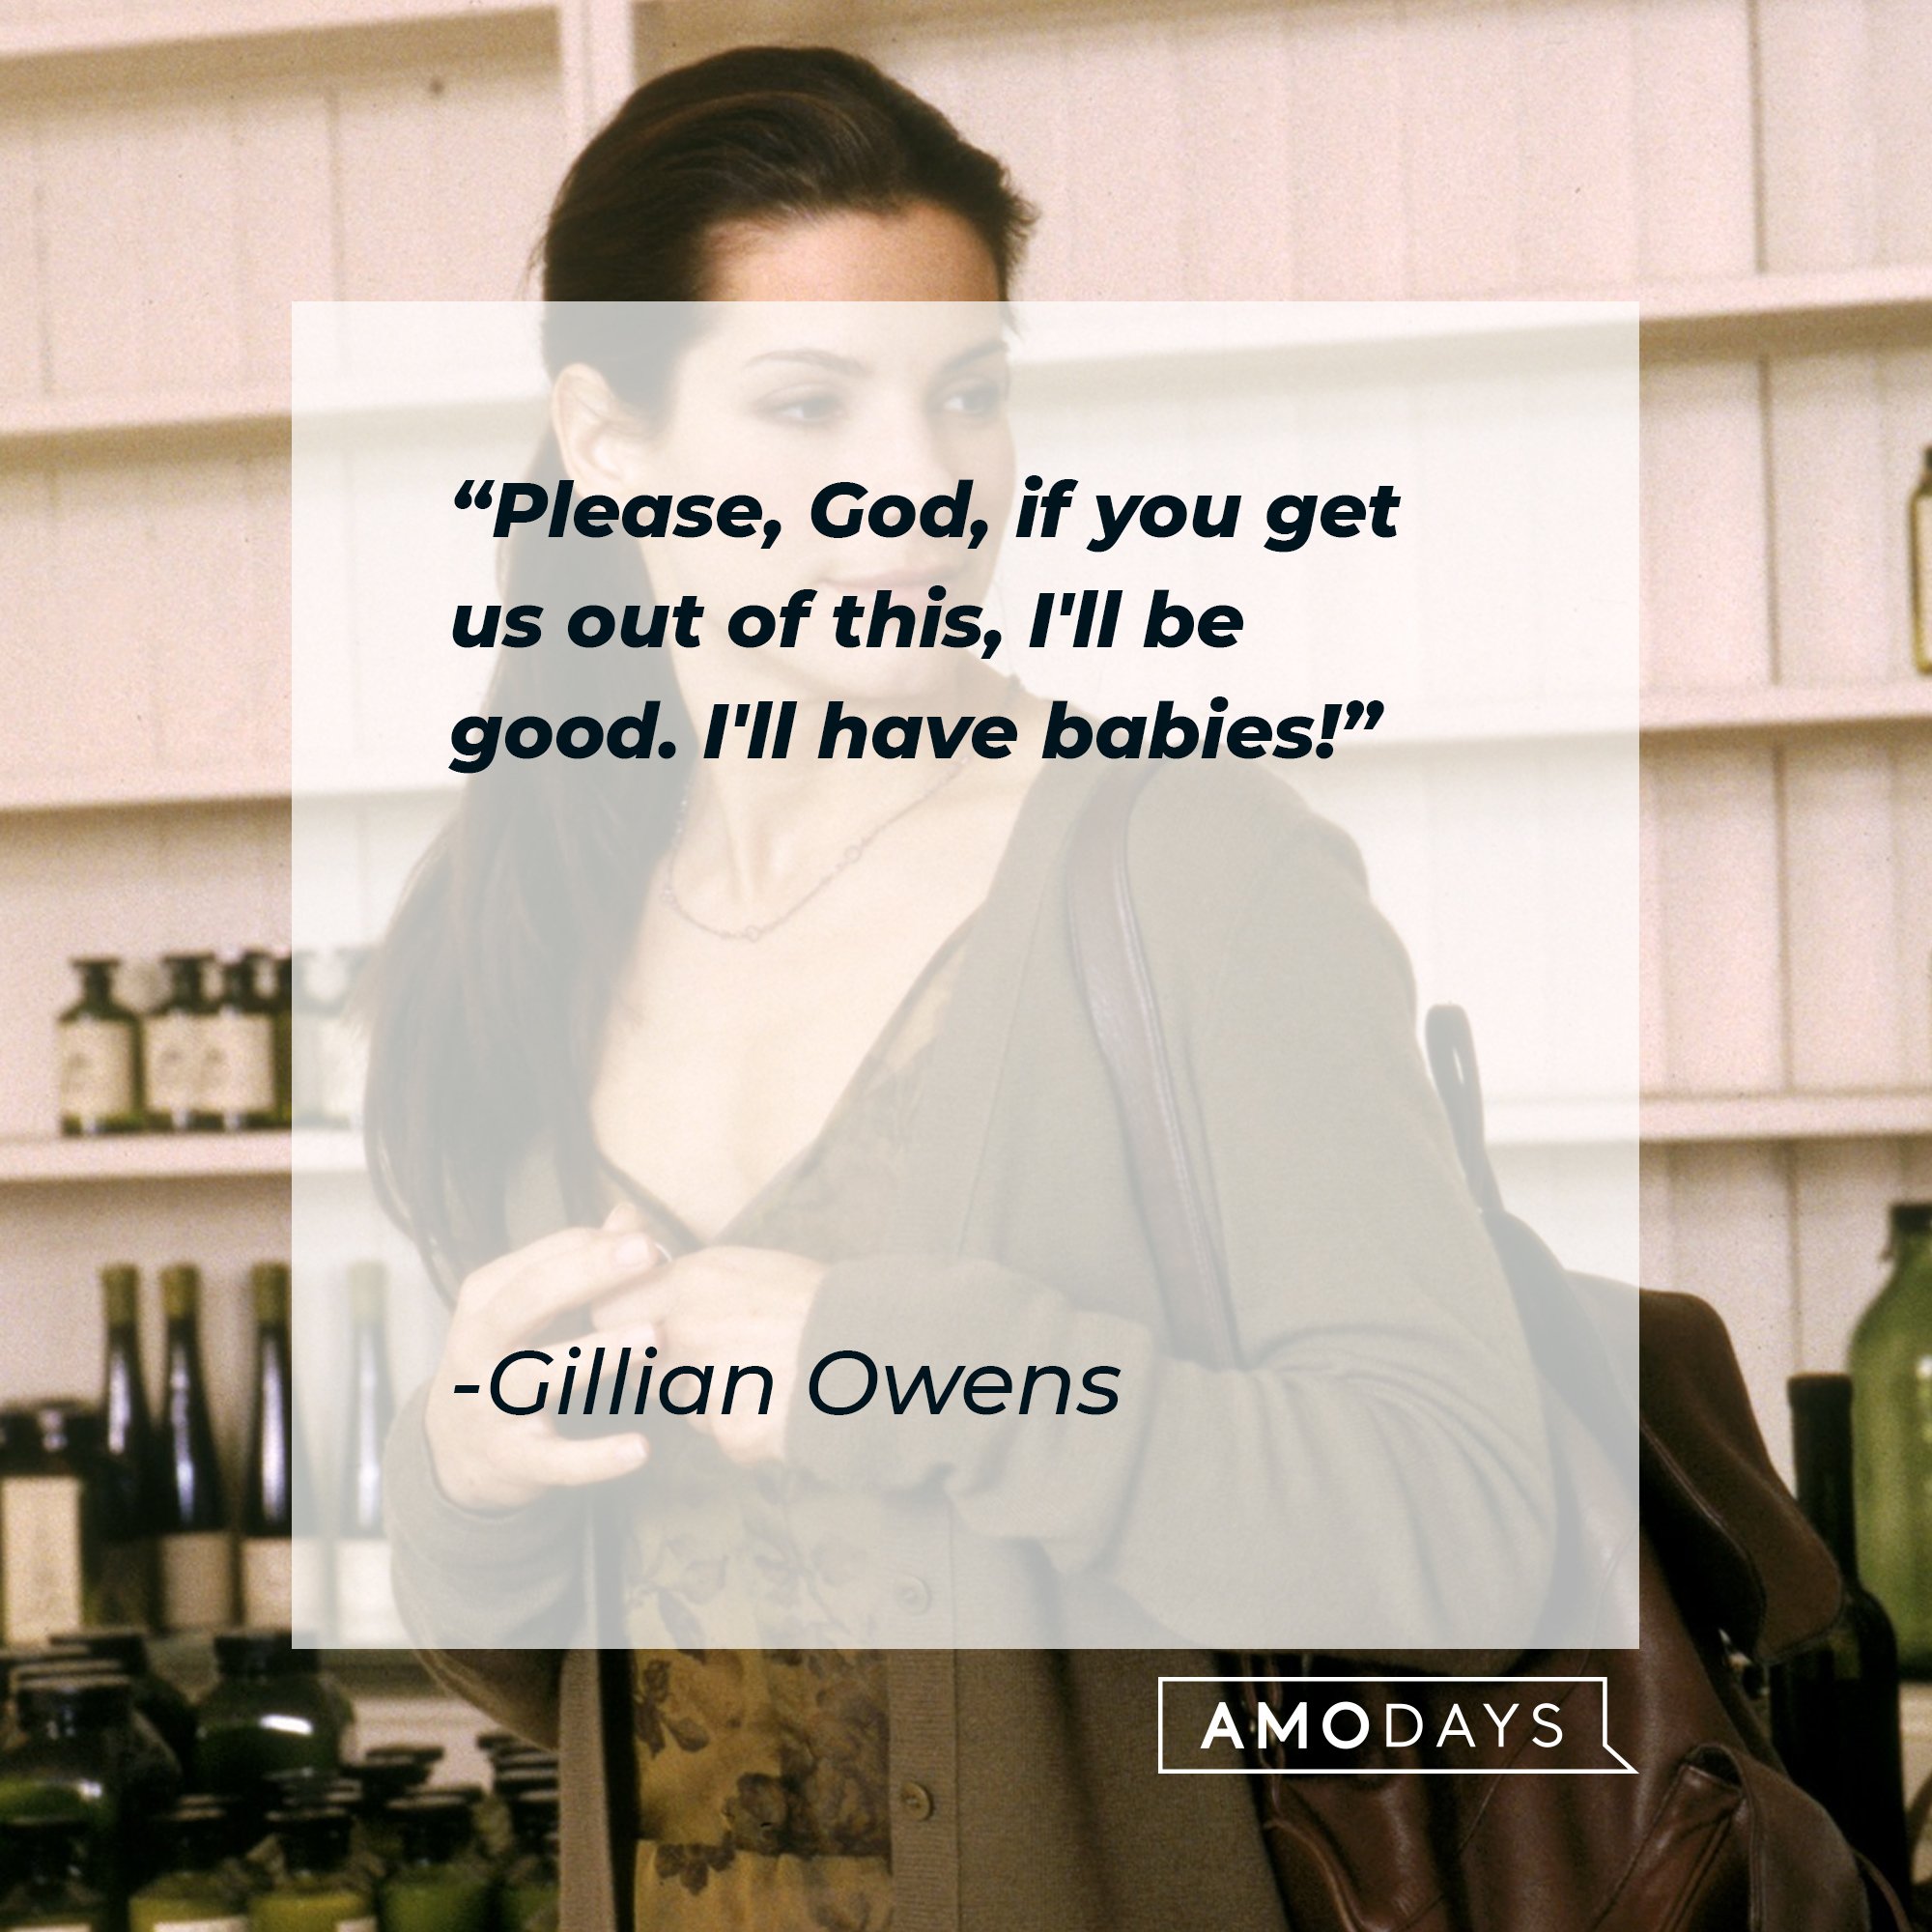 Gillian Owens’ quote: "Please, God, if you get us out of this, I'll be good. I'll have babies!" | Image: AmoDays